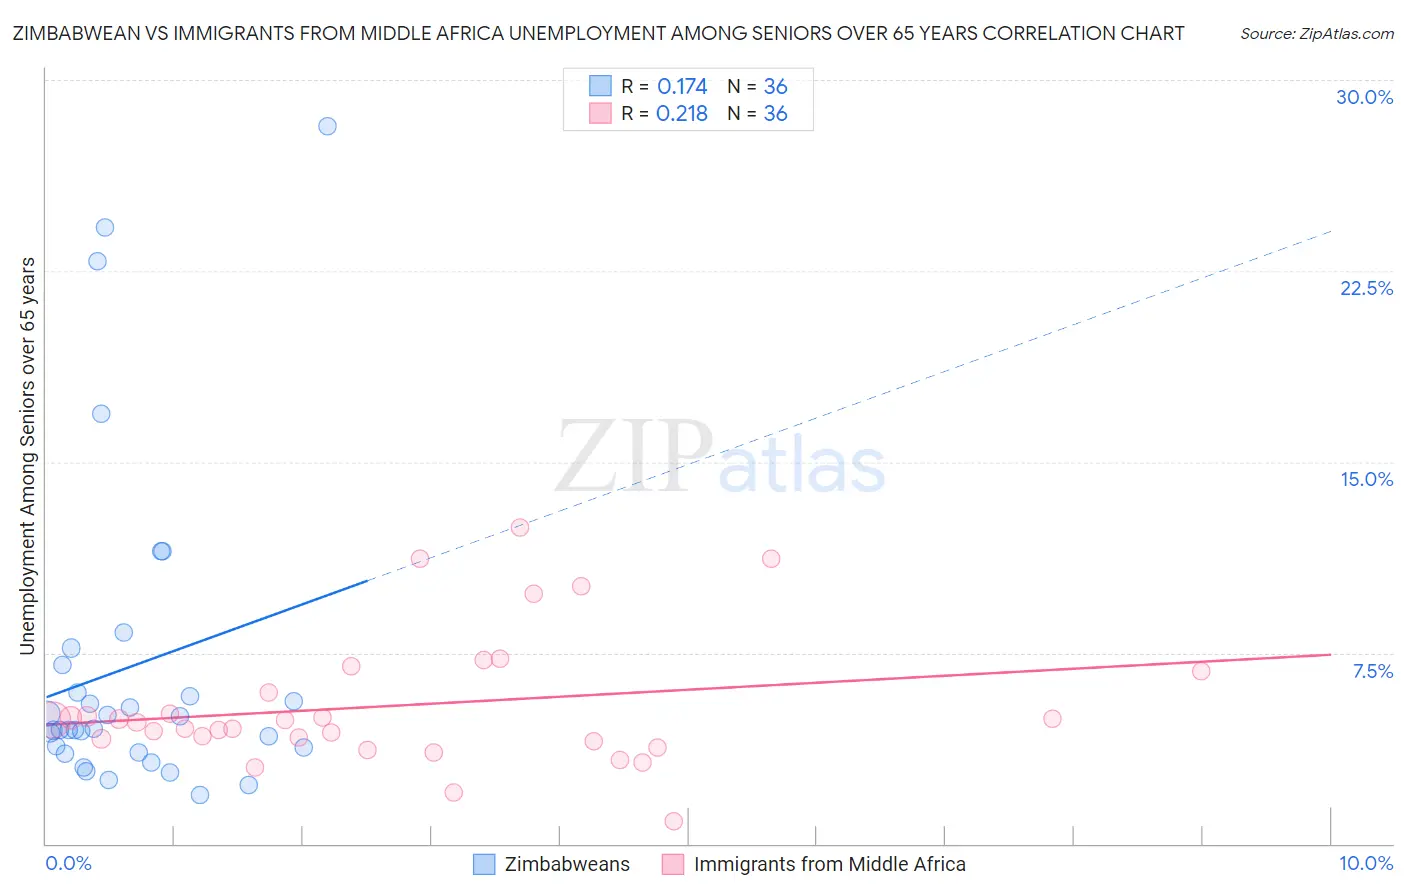 Zimbabwean vs Immigrants from Middle Africa Unemployment Among Seniors over 65 years